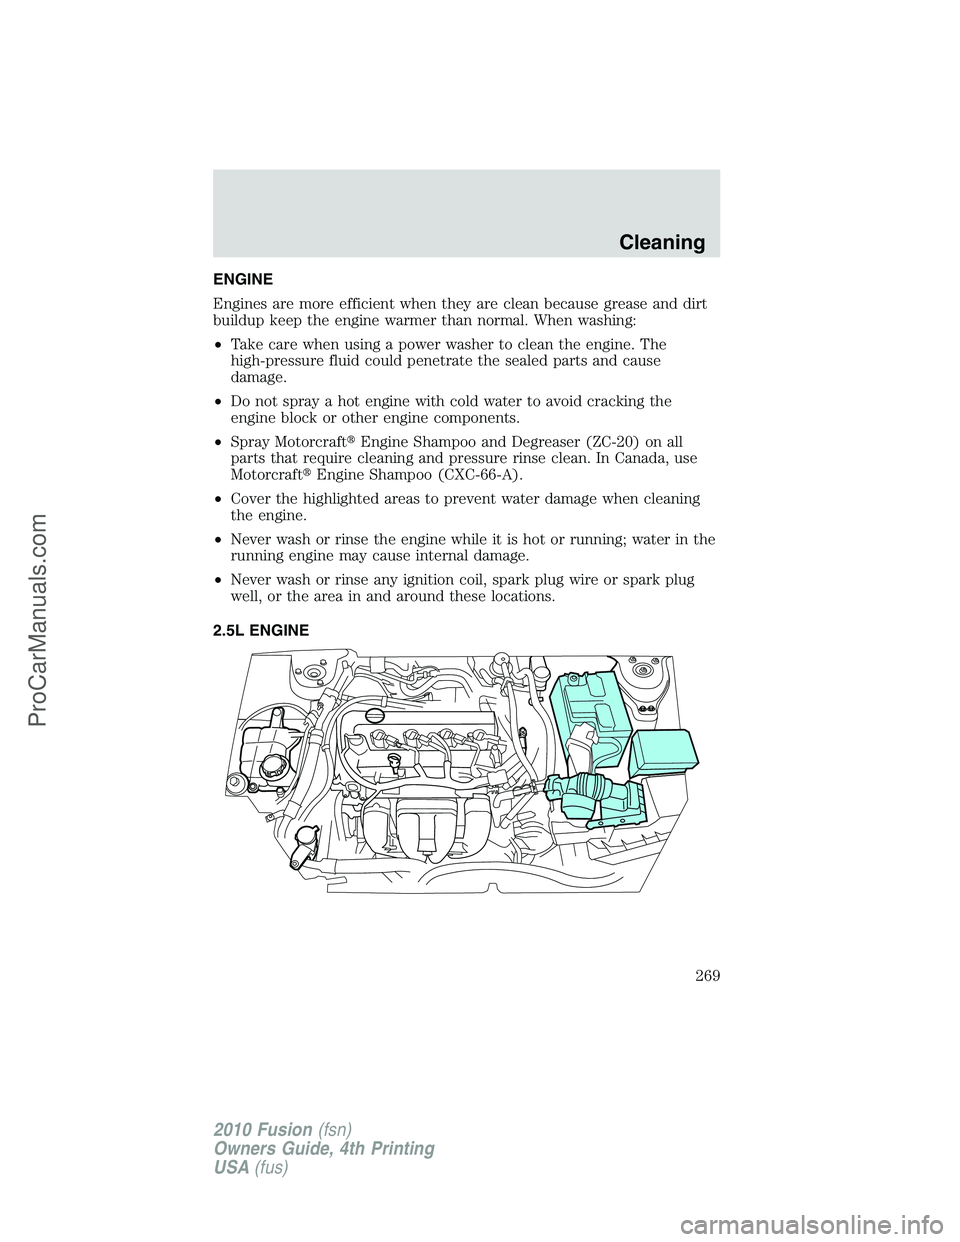 FORD FUSION 2010  Owners Manual ENGINE
Engines are more efficient when they are clean because grease and dirt
buildup keep the engine warmer than normal. When washing:
•Take care when using a power washer to clean the engine. The
